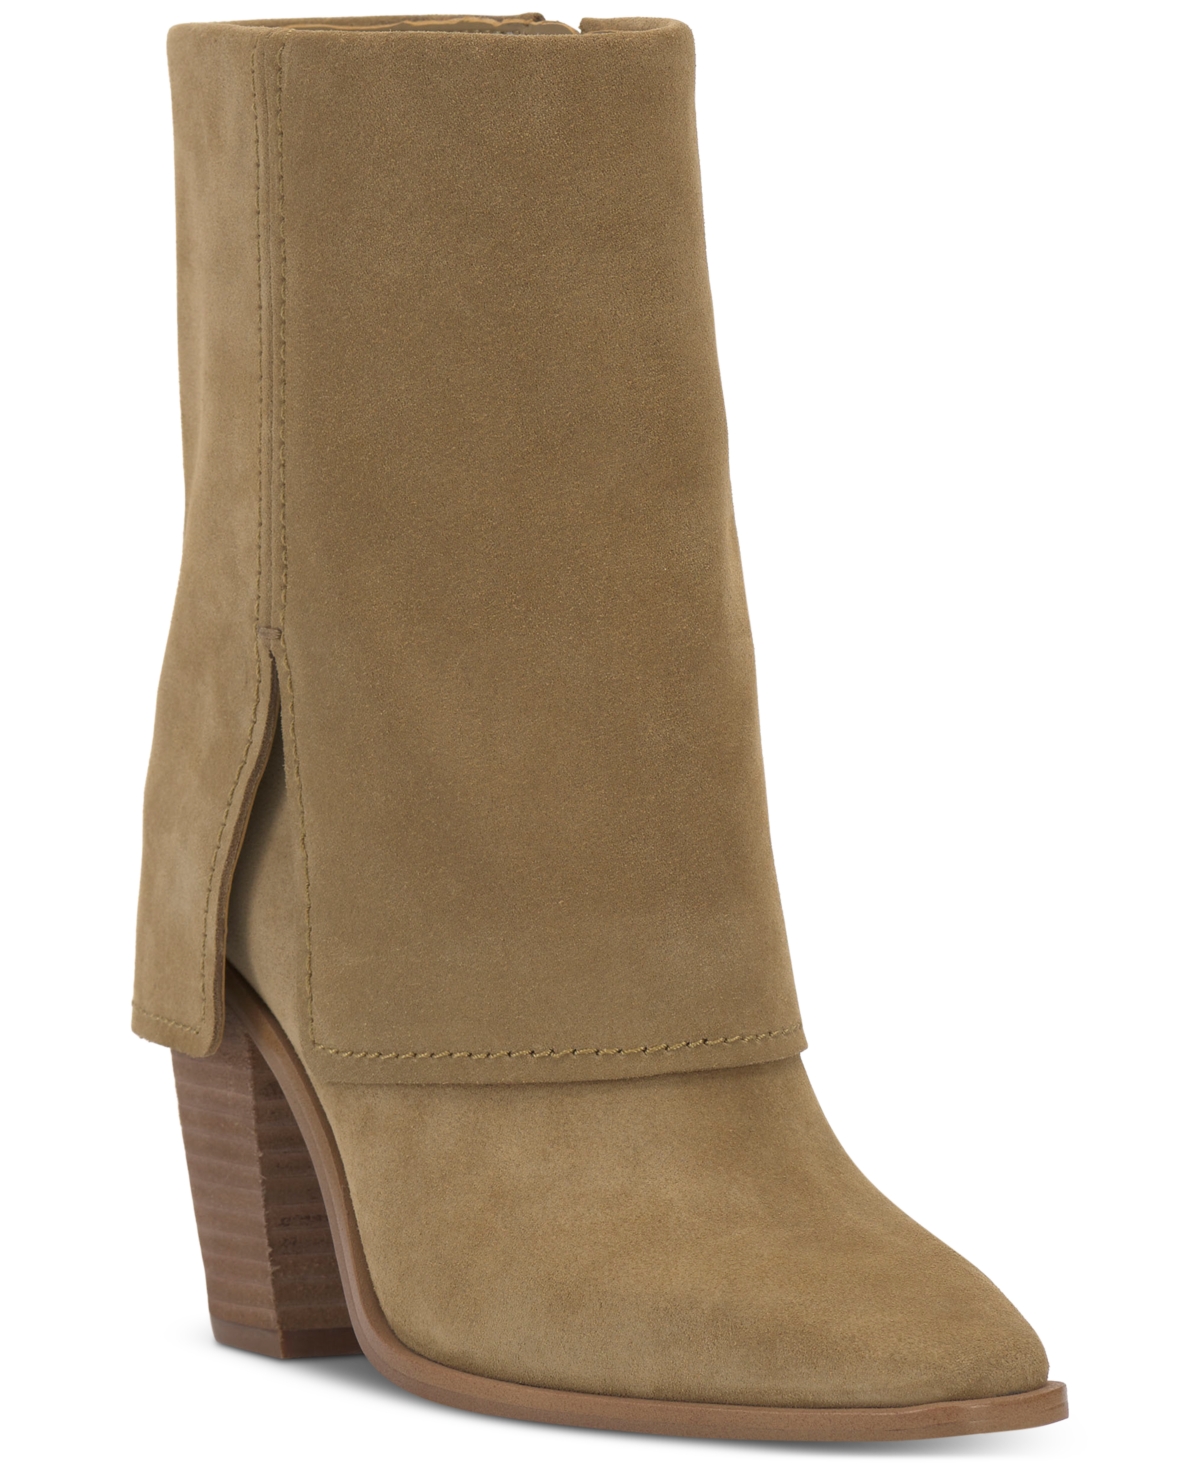 VINCE CAMUTO WOMEN'S ALOLISON CUFFED ANKLE BOOTIES